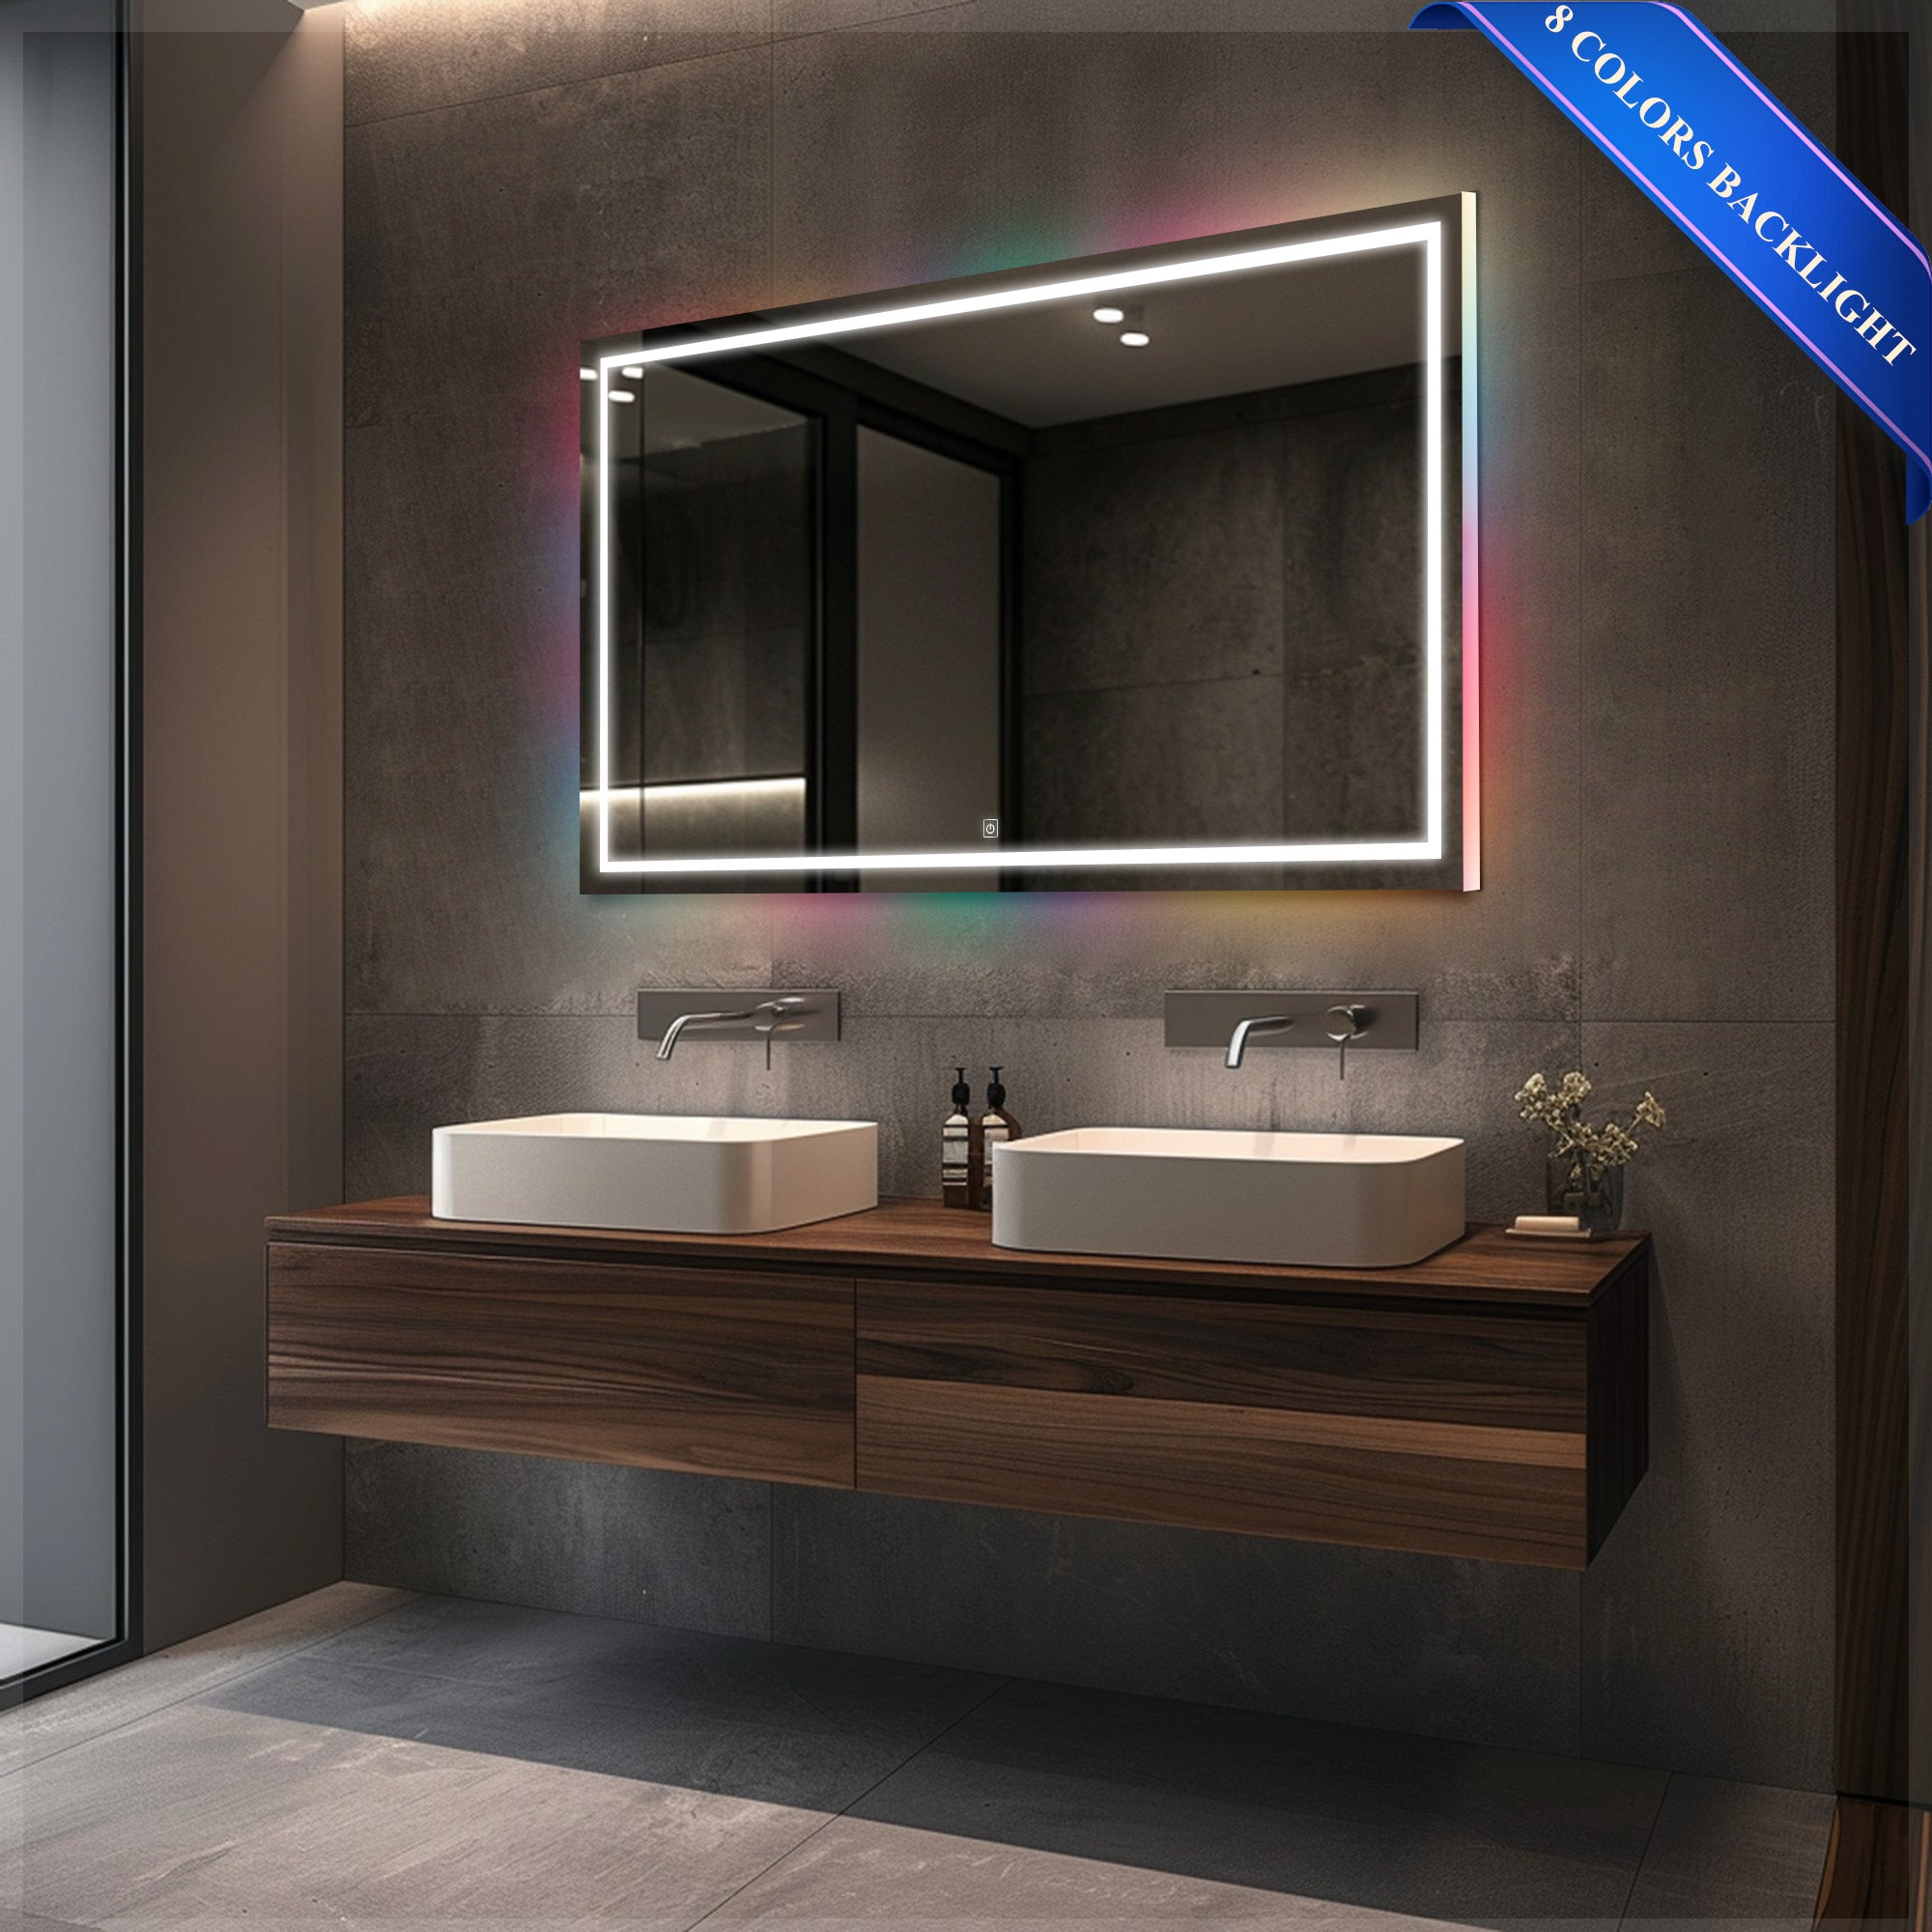 48"W*30"H POLARIS LED Mirror with 8 Colors Backlight